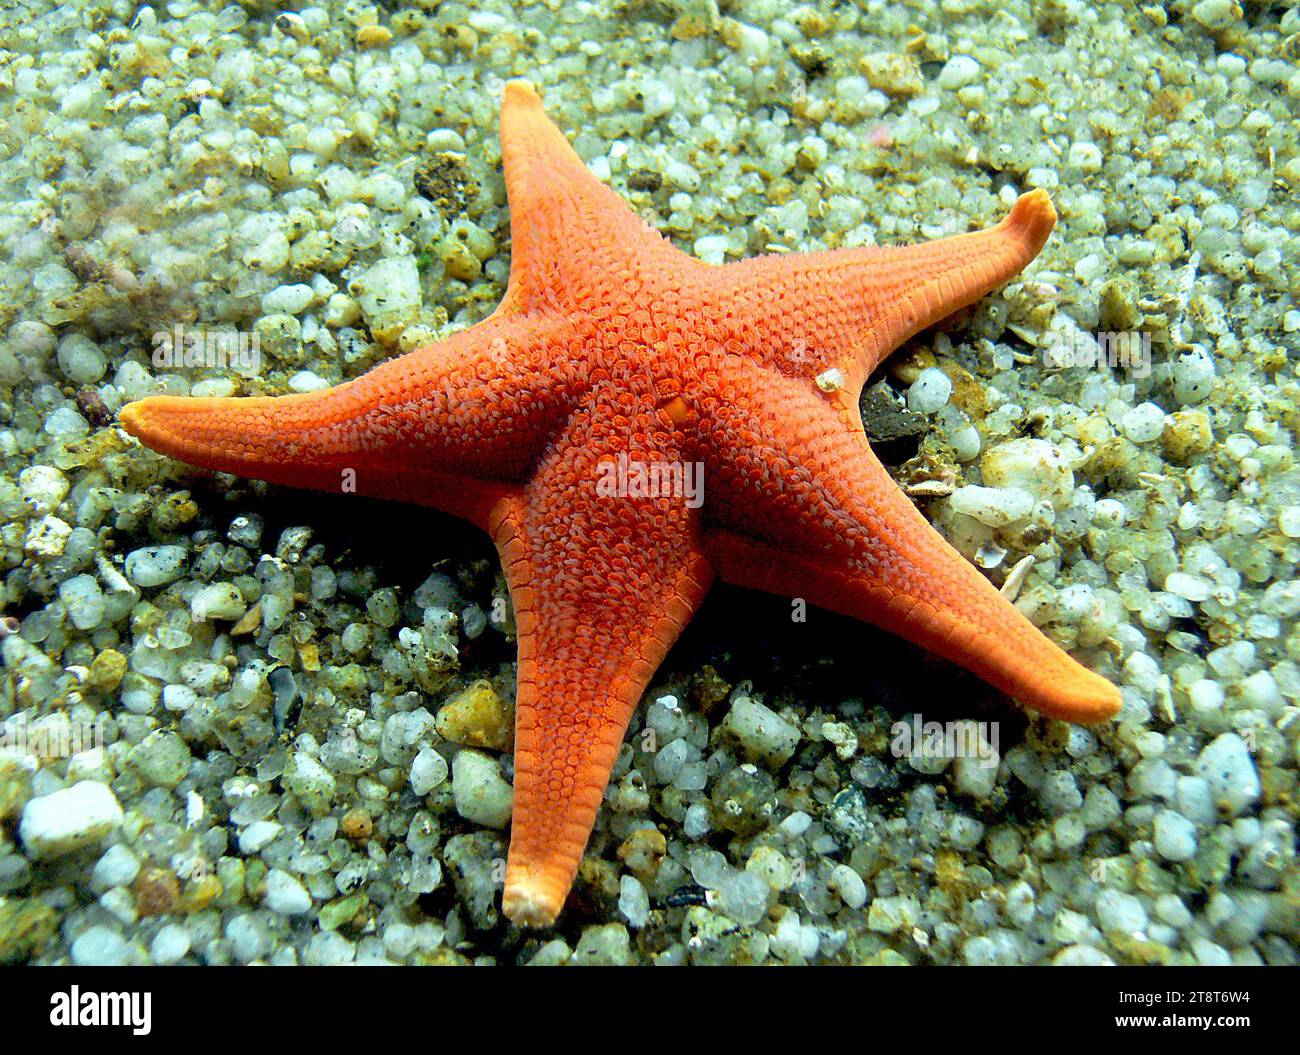 Starfish, Starfish or sea stars are star-shaped echinoderms belonging to the class Asteroidea. Common usage frequently finds these names being also applied to ophiuroids, which are correctly referred to as brittle stars or basket stars. Starfish are also known as asteroids due to being in the class Asteroidea Stock Photo